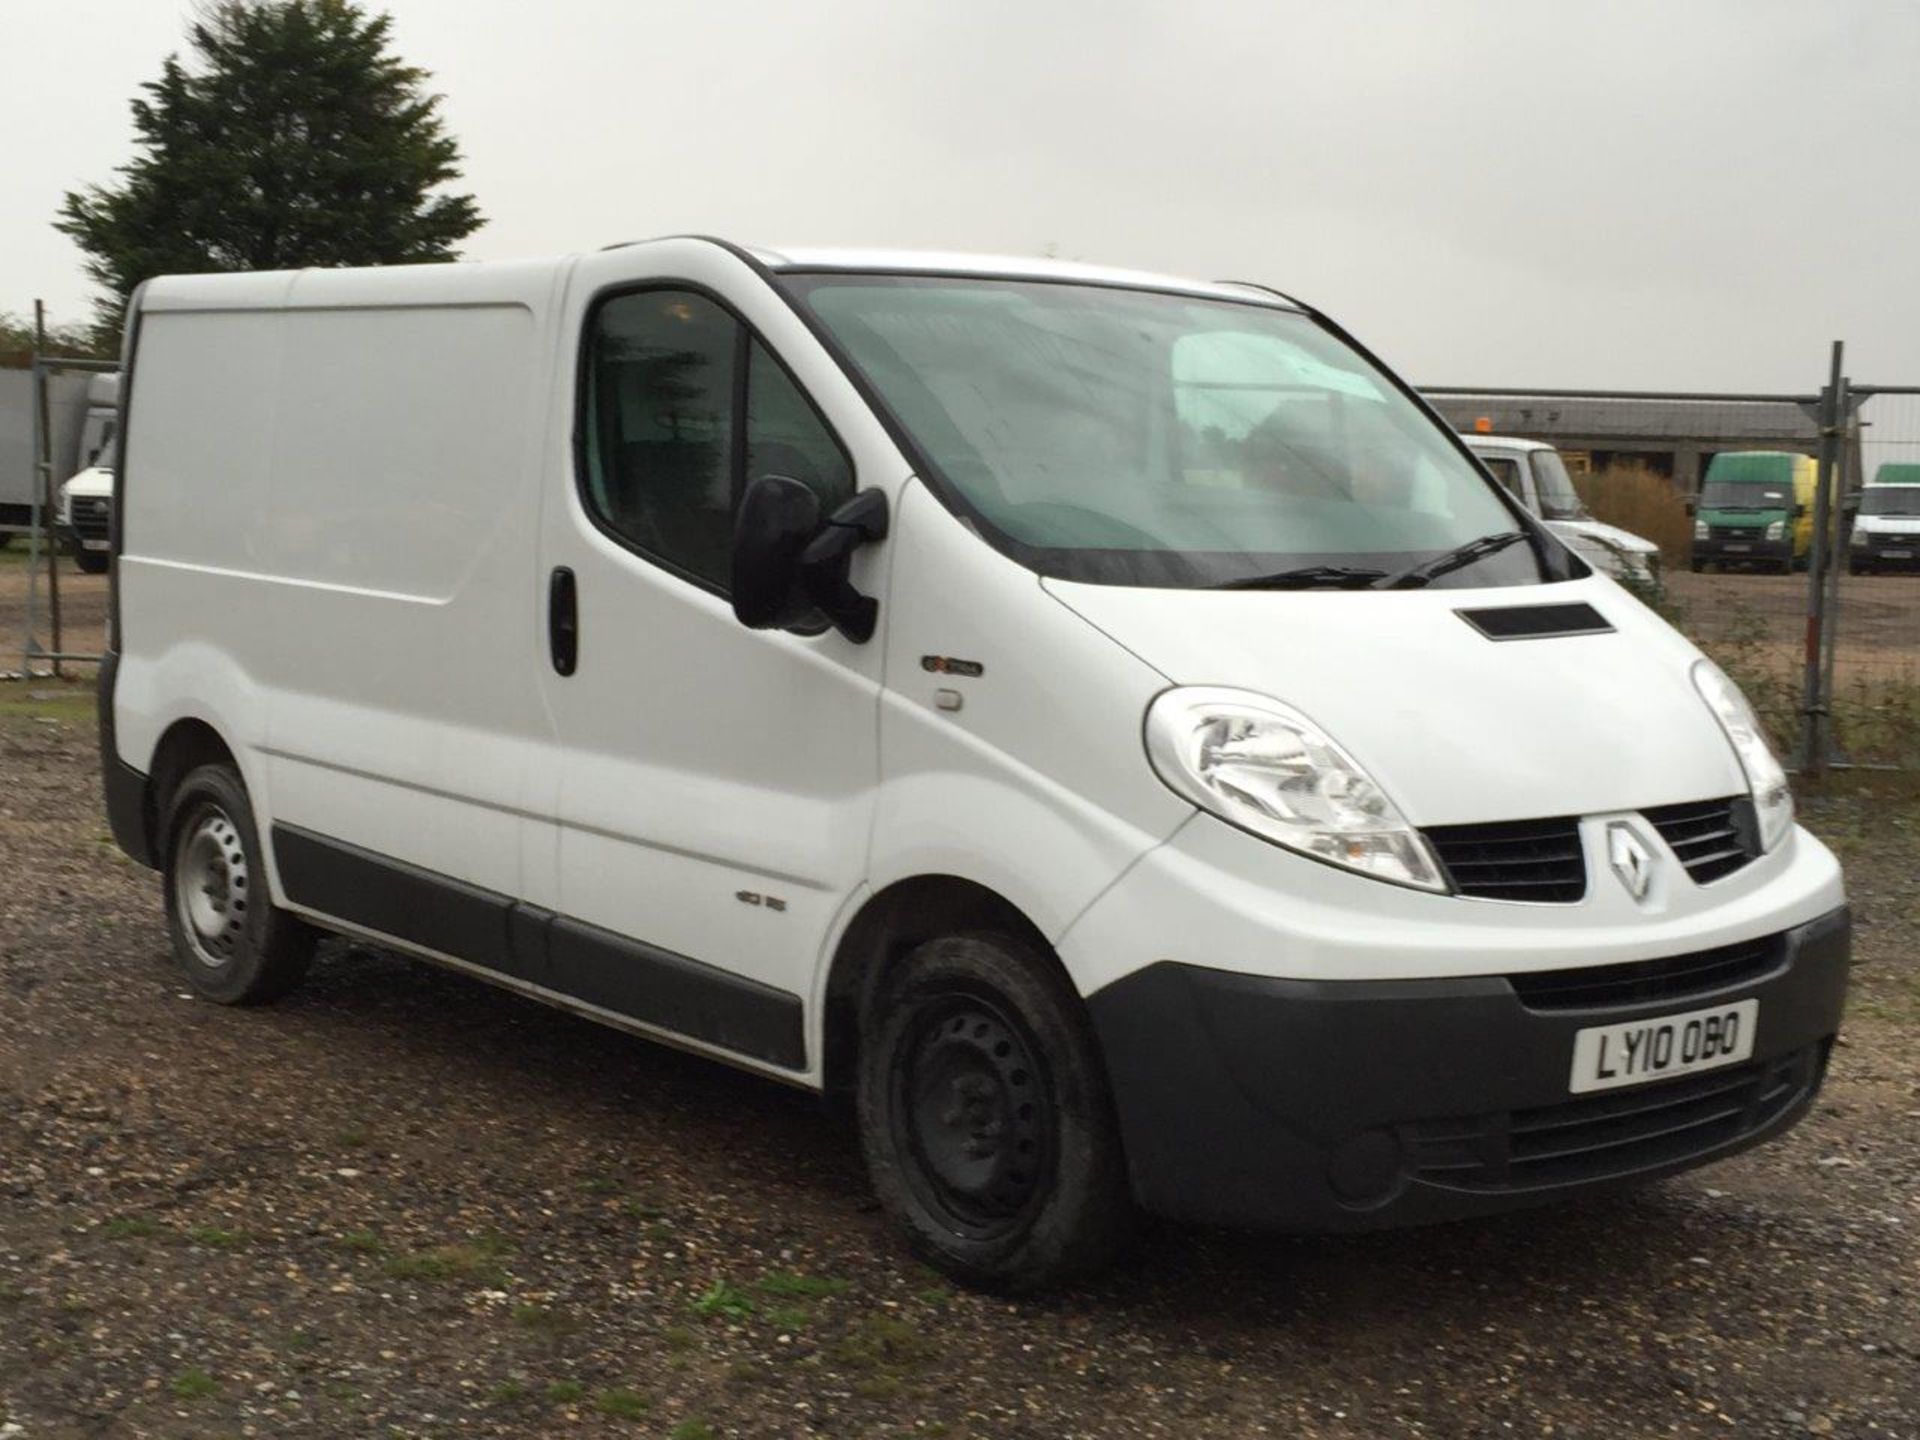 2010/10 REG RENAULT TRAFFIC SL27 EXTRA DCI PANEL VAN ONE OWNER
looks and drives PERFECT!! THE